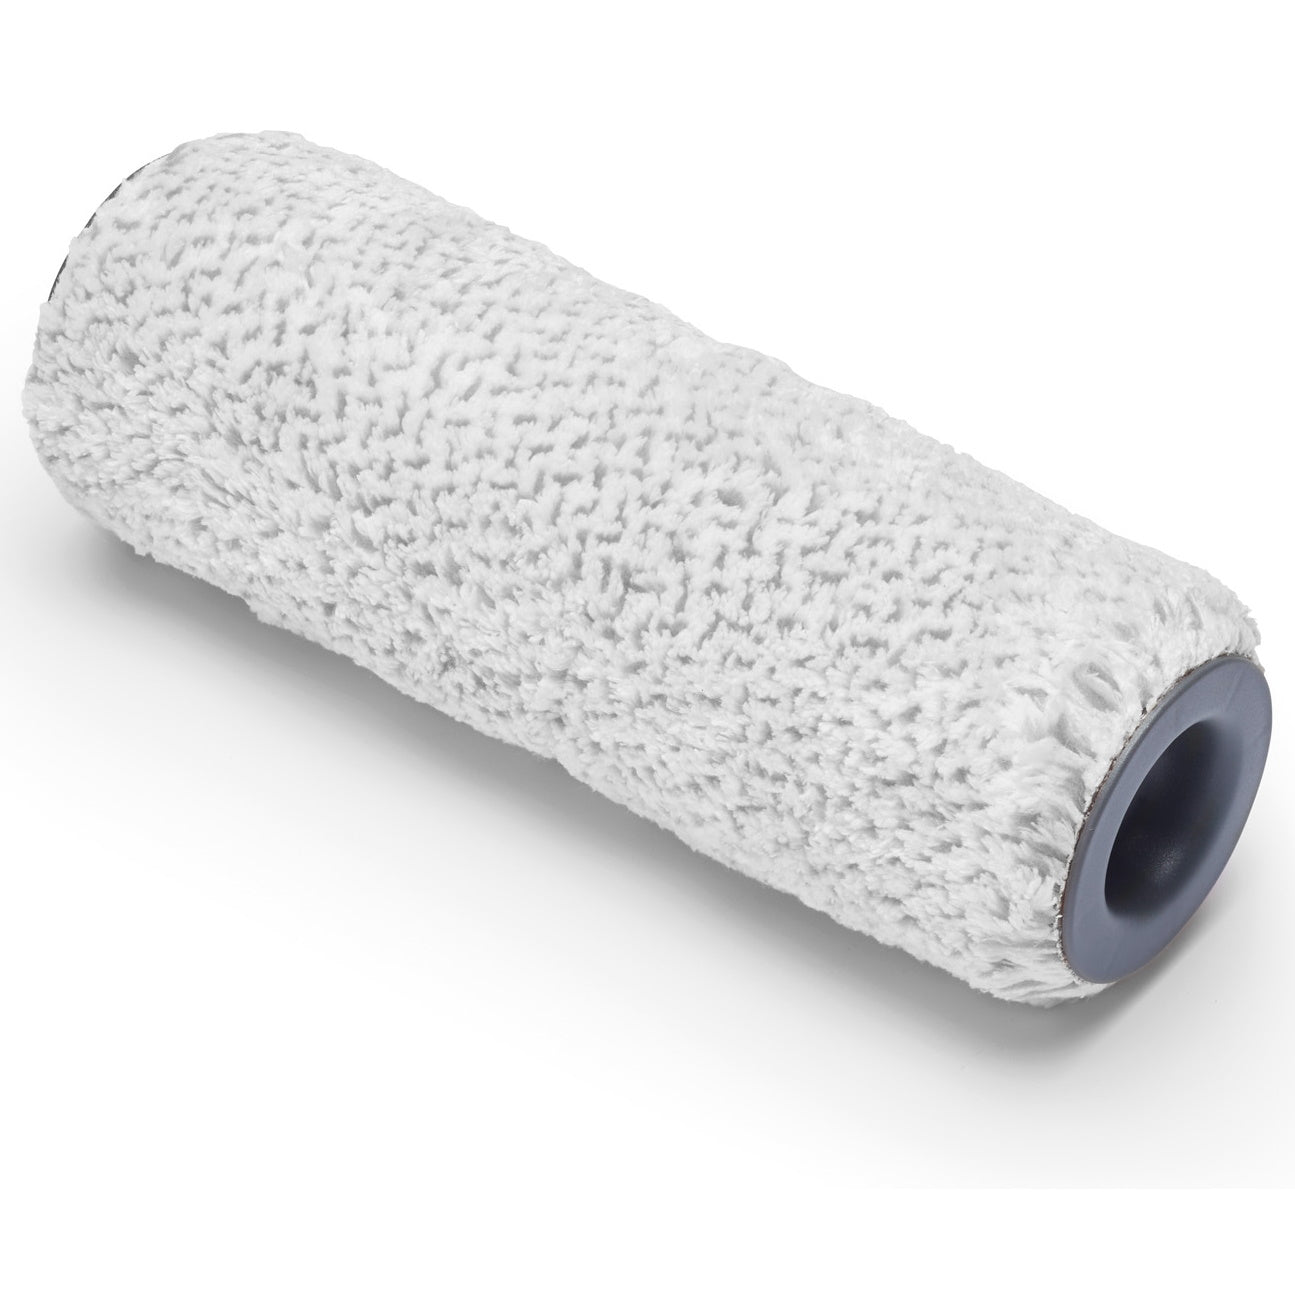 Harris Ultimate 103012001 Walls & Ceilings Powercoat 9" Roller Sleeve - Premium Rollers from HARRIS - Just $3.20! Shop now at W Hurst & Son (IW) Ltd